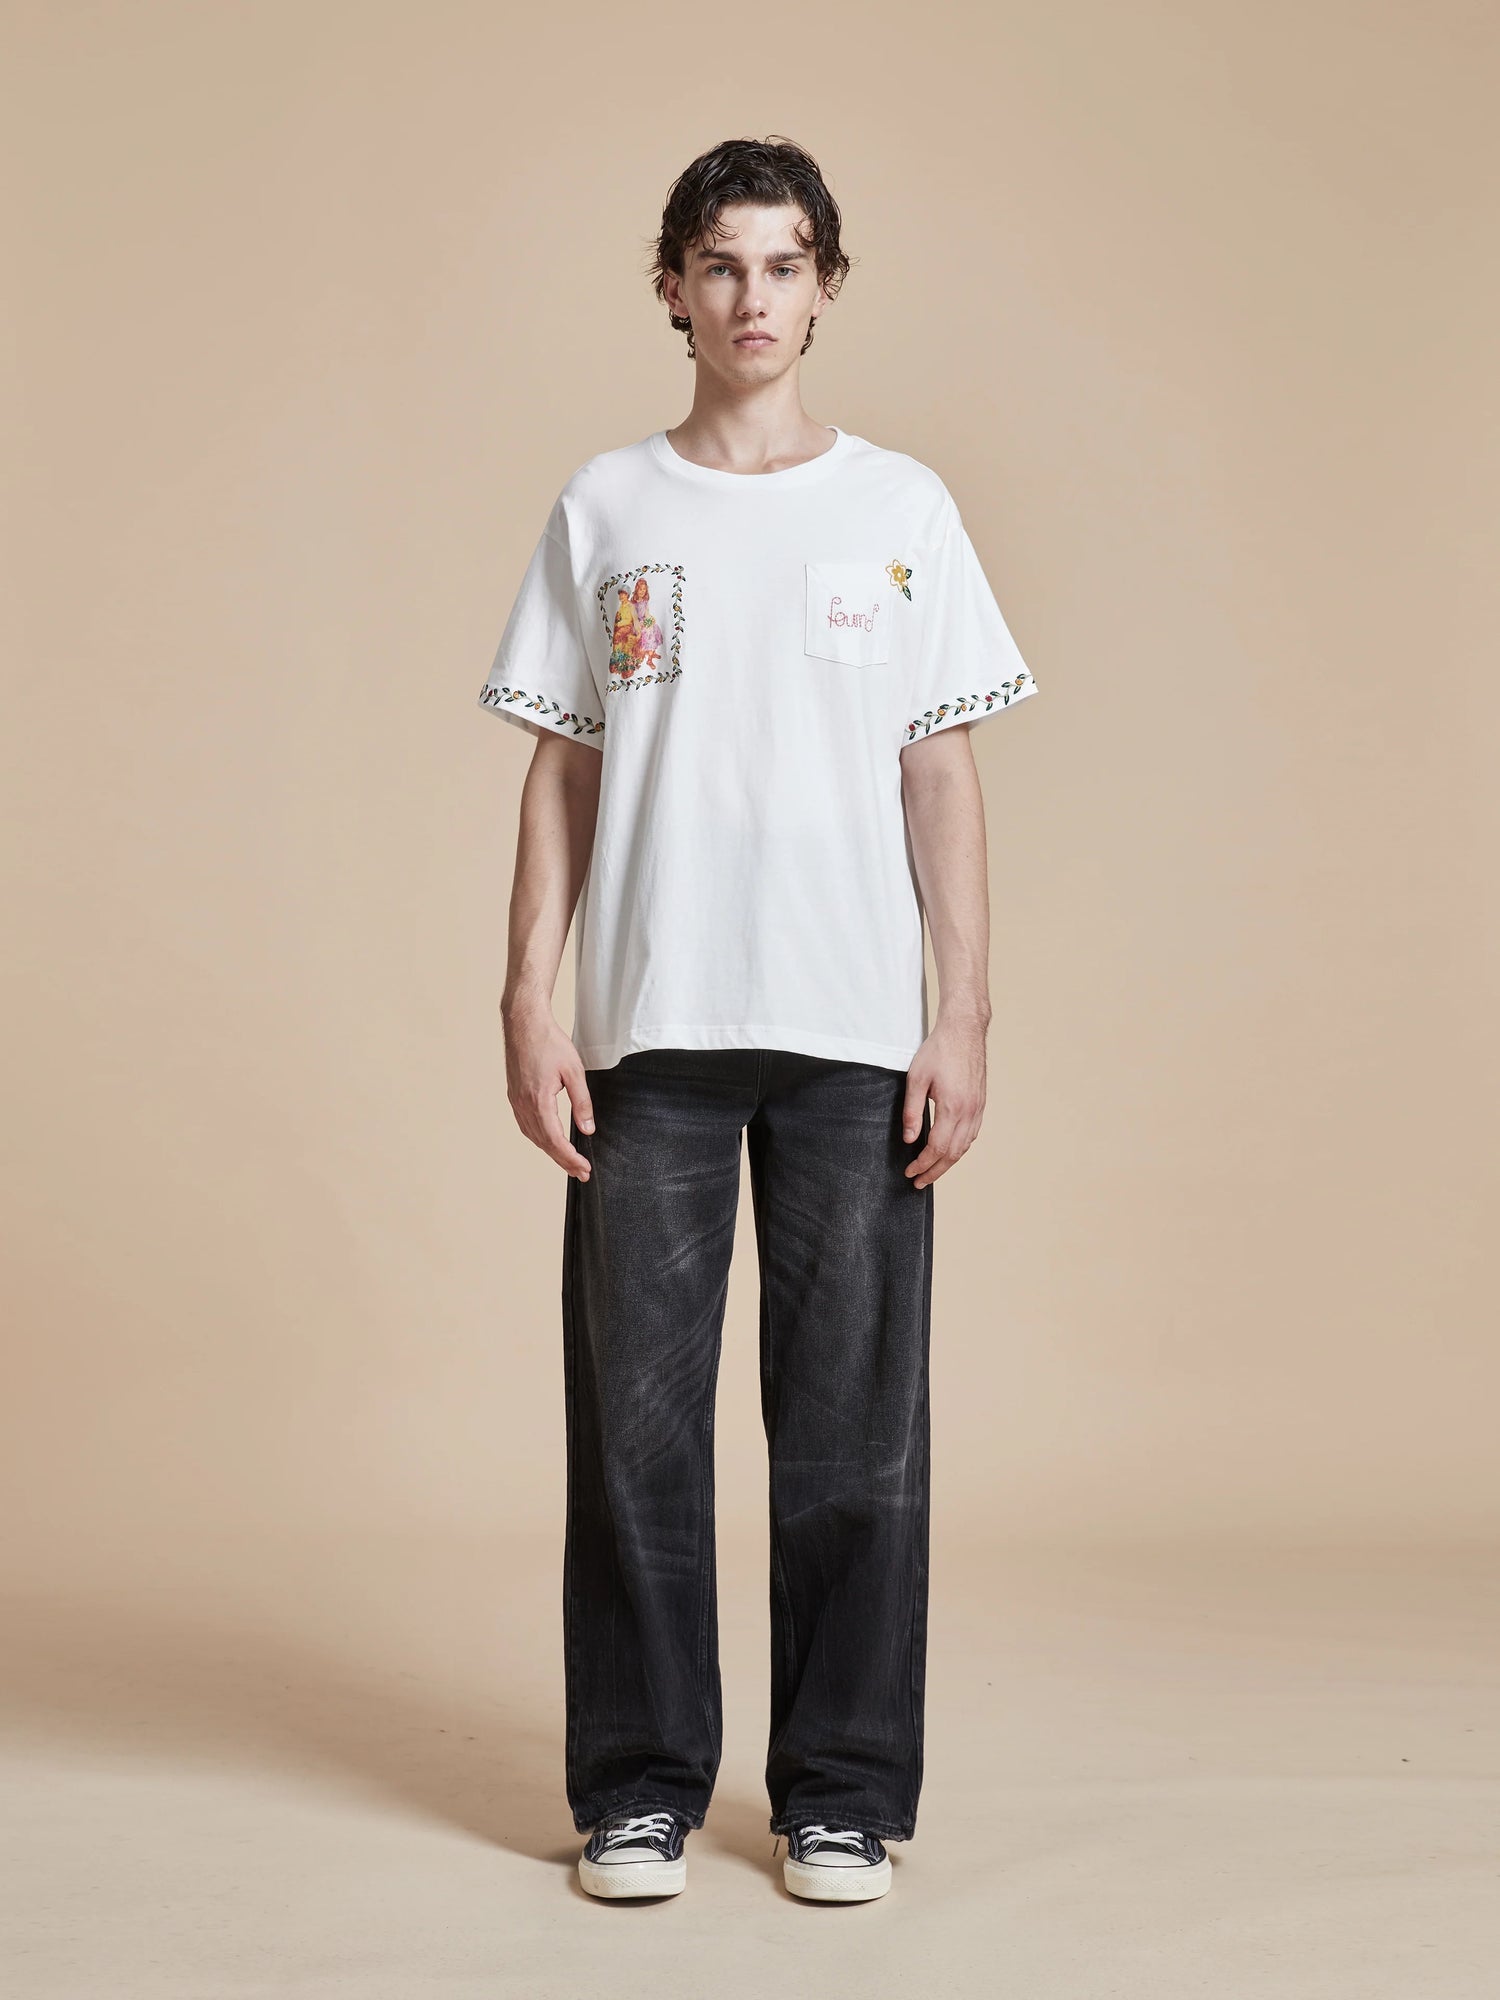 A man wearing a white Flower Children Tee with floral Phulkari style embroideries and black pants. Brand: Found